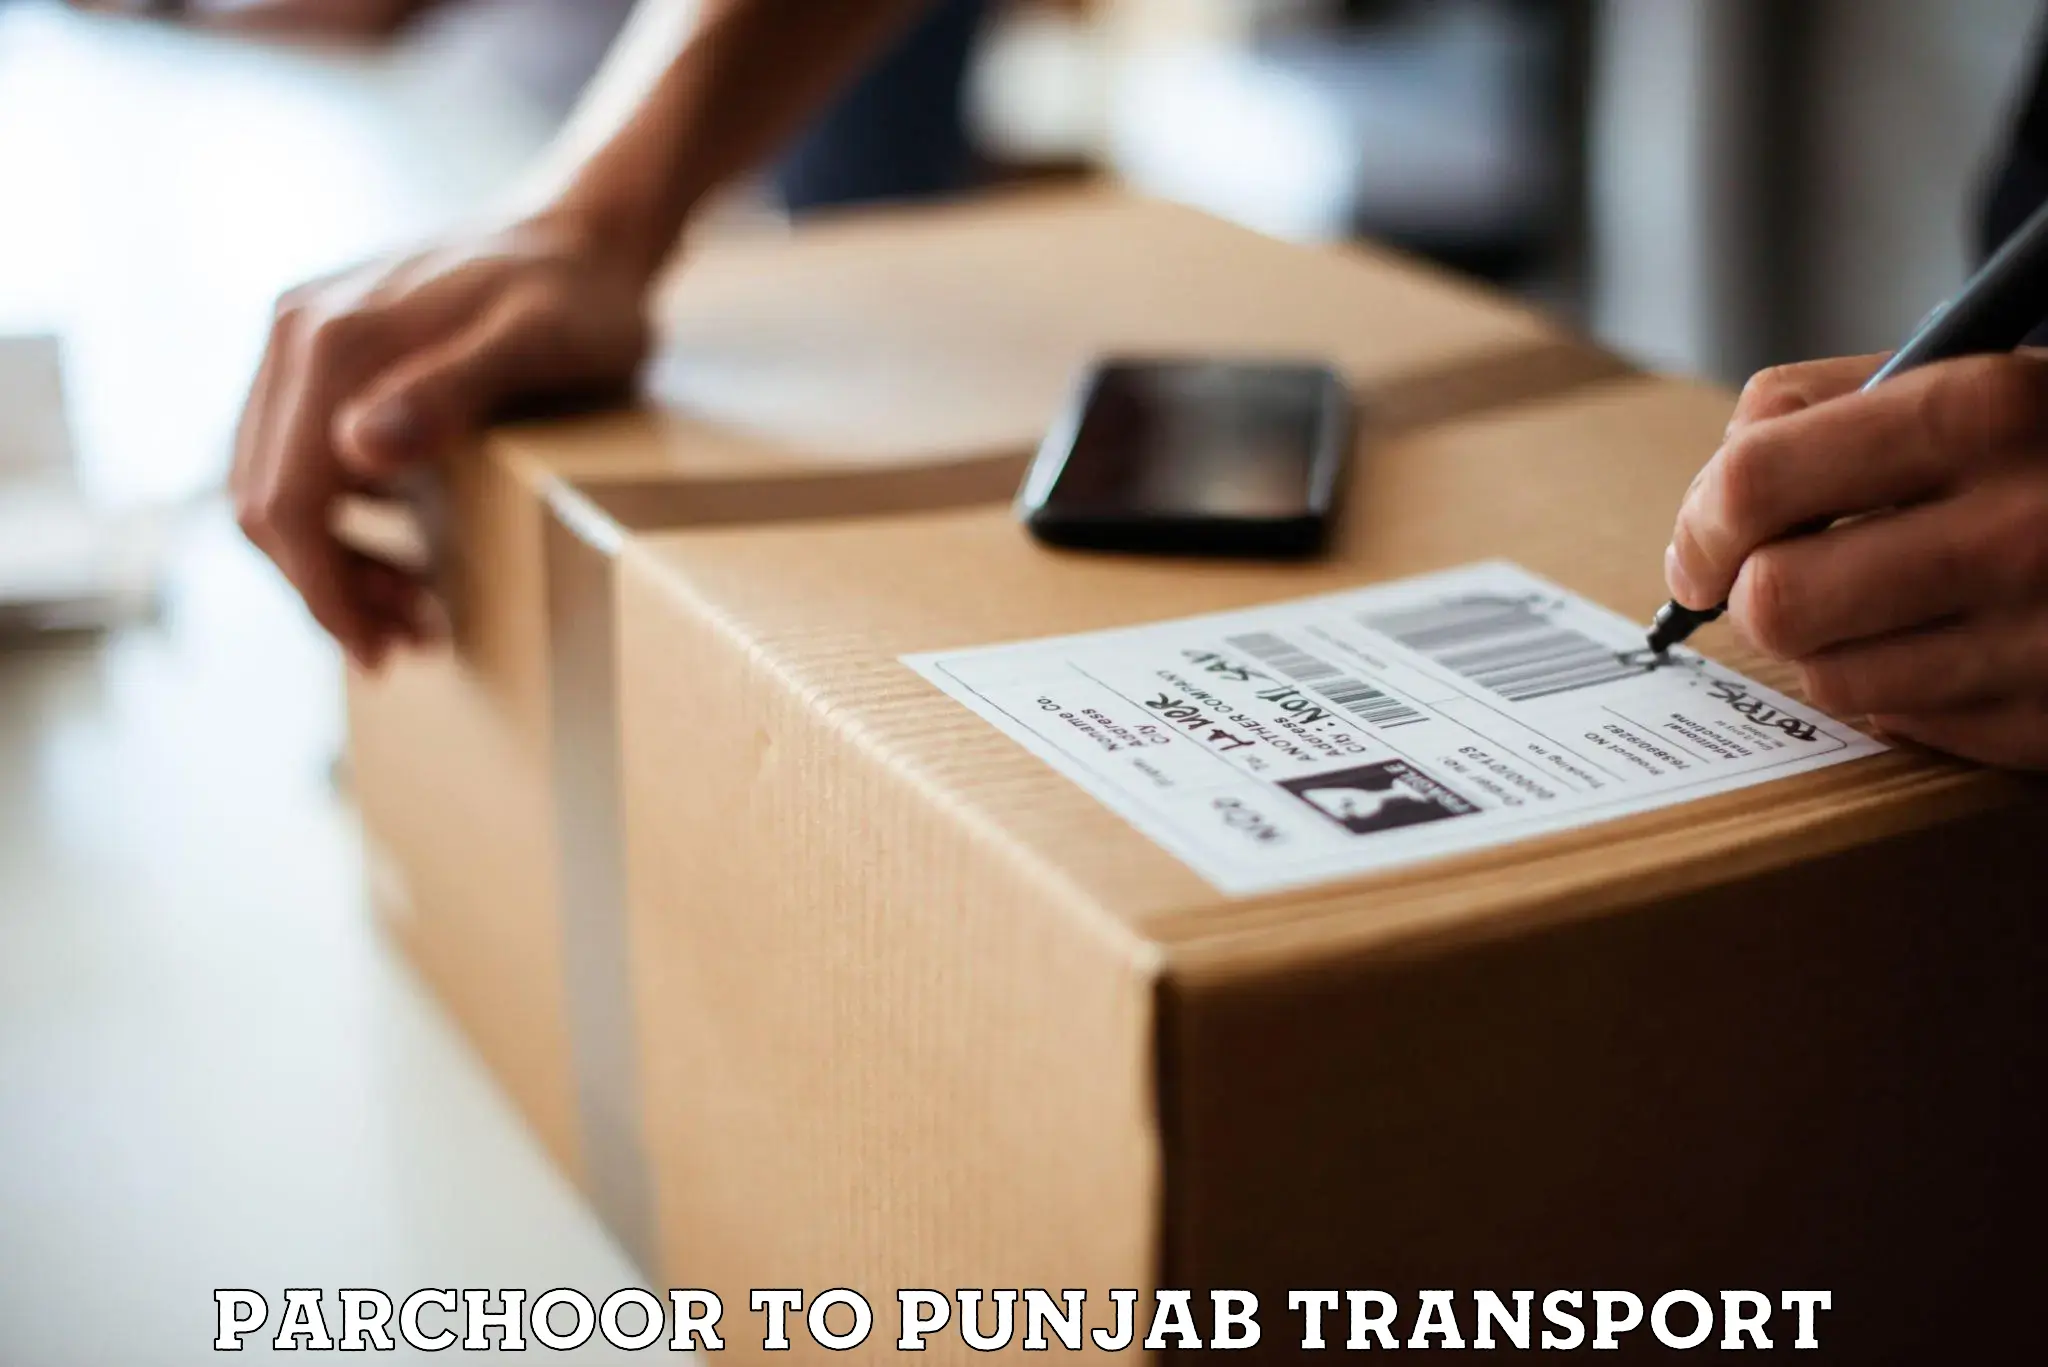 Bike transport service Parchoor to Thapar Institute of Engineering and Technology Patiala